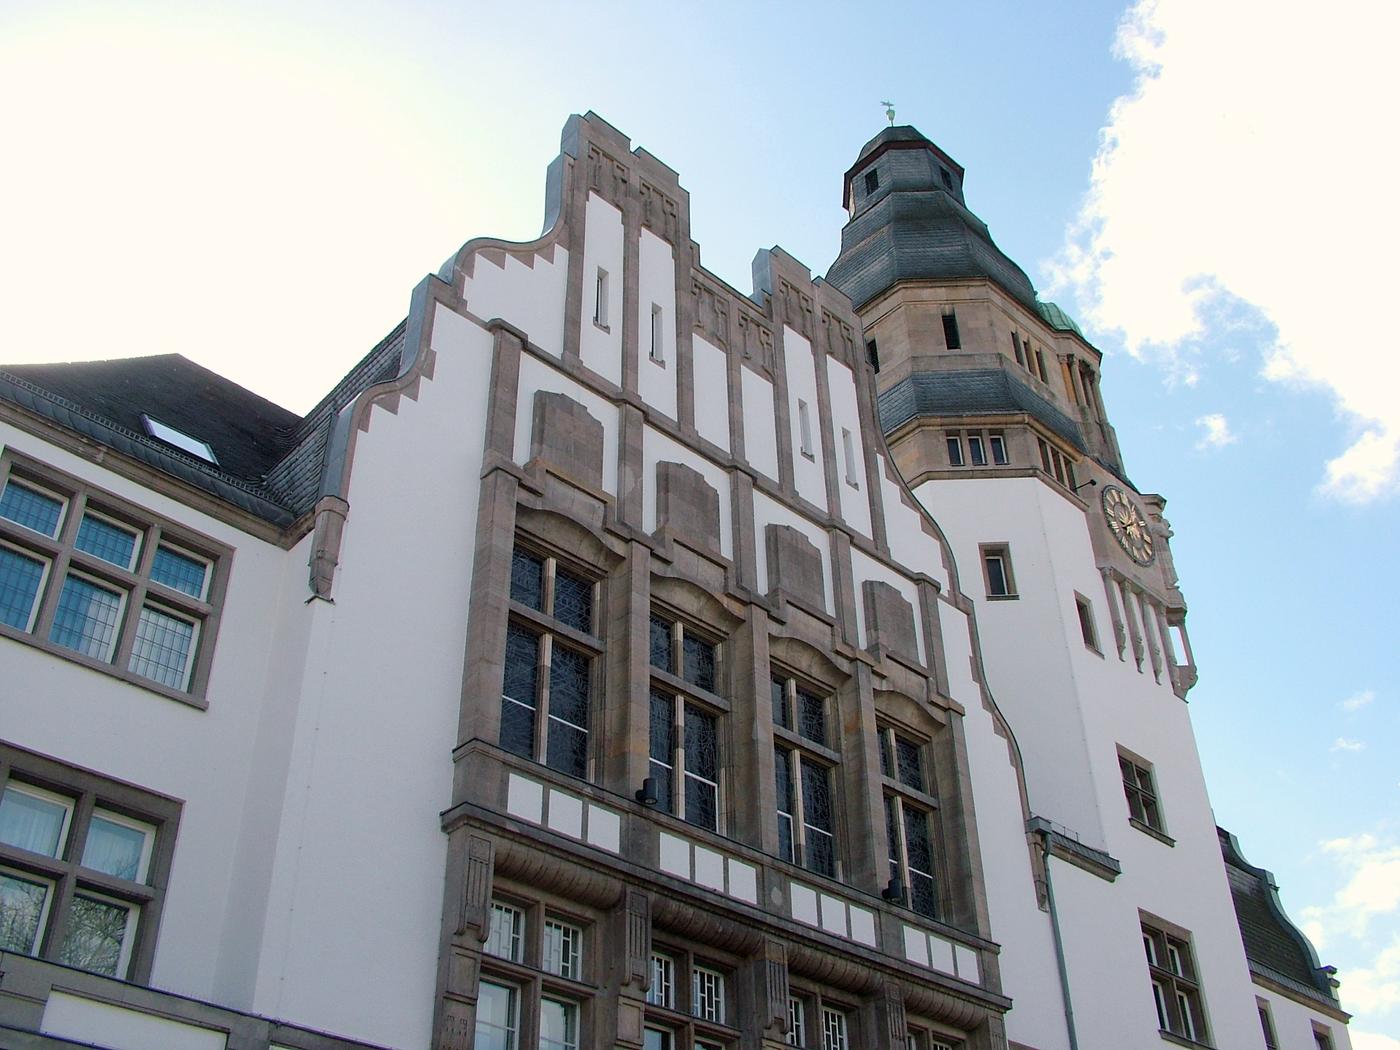 Gladbeck: A jewel in the Ruhr area